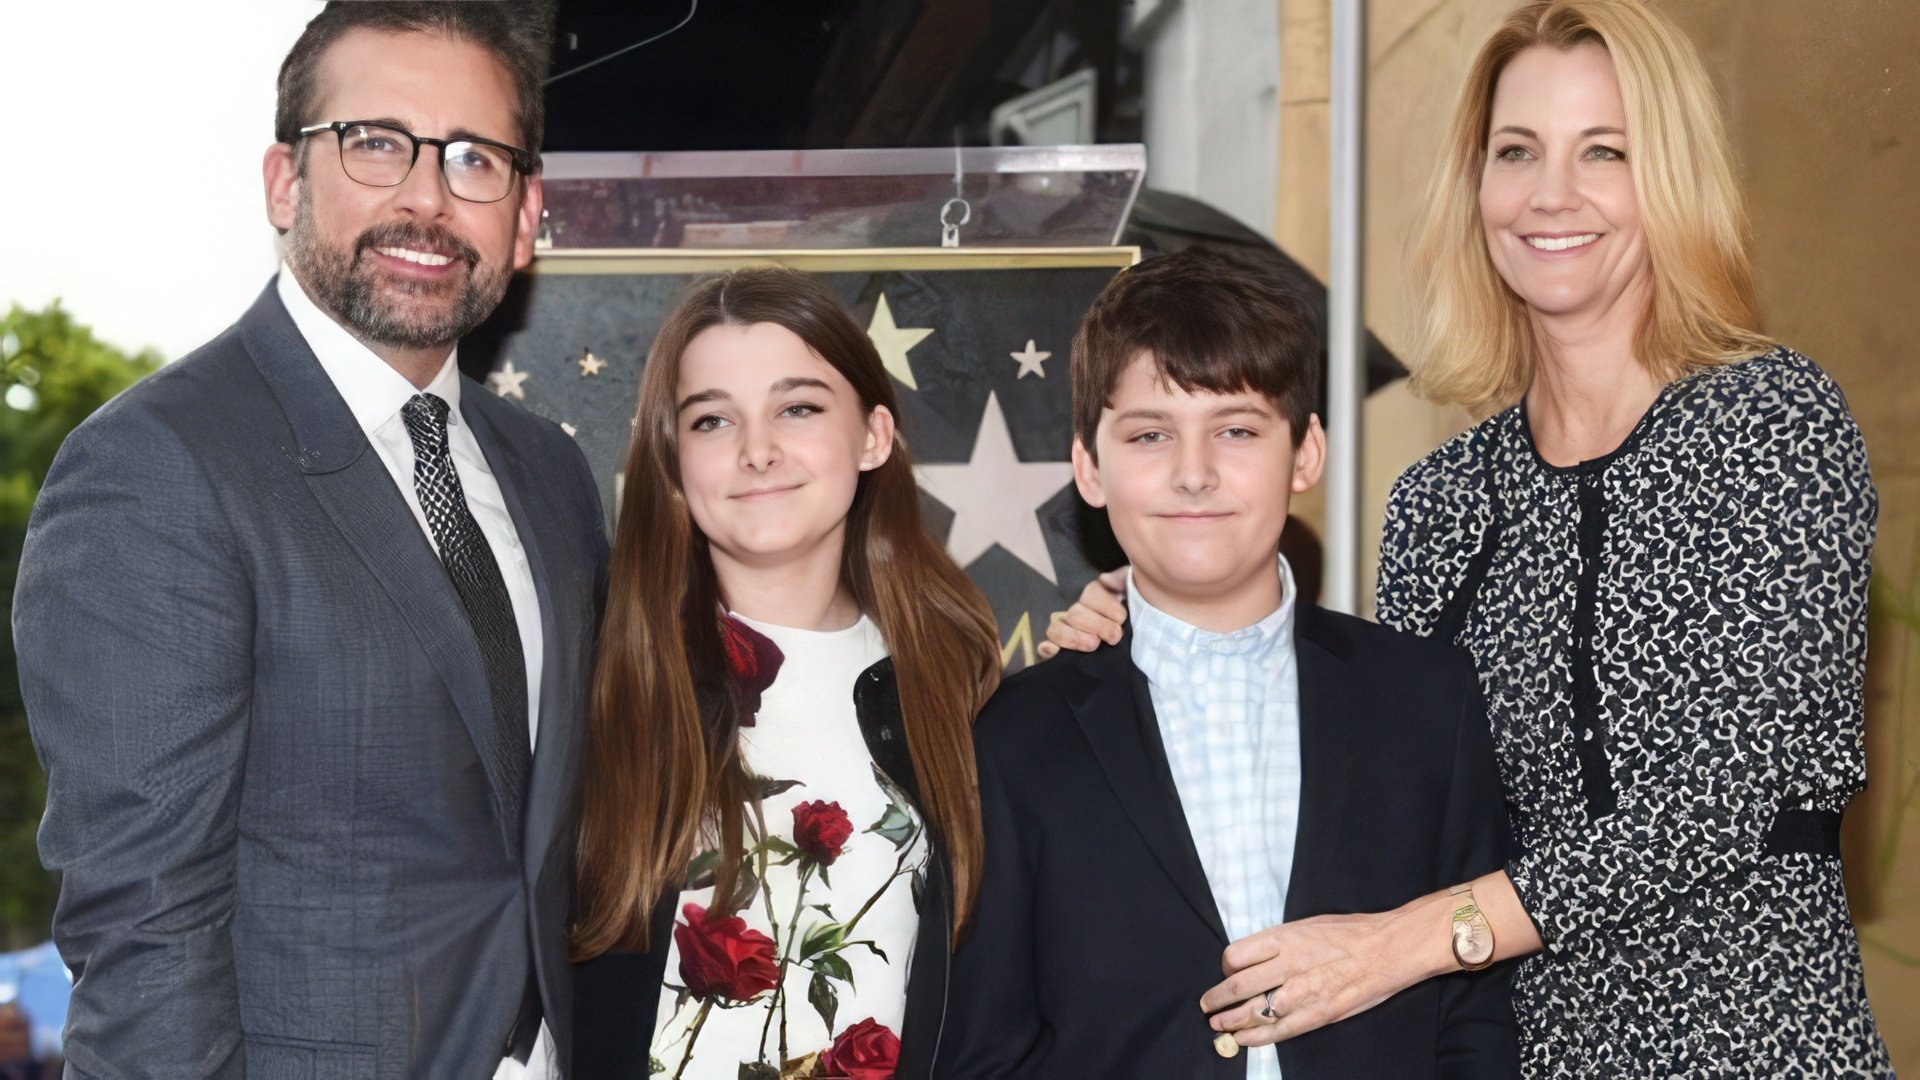 Steve Carell with his wife and children